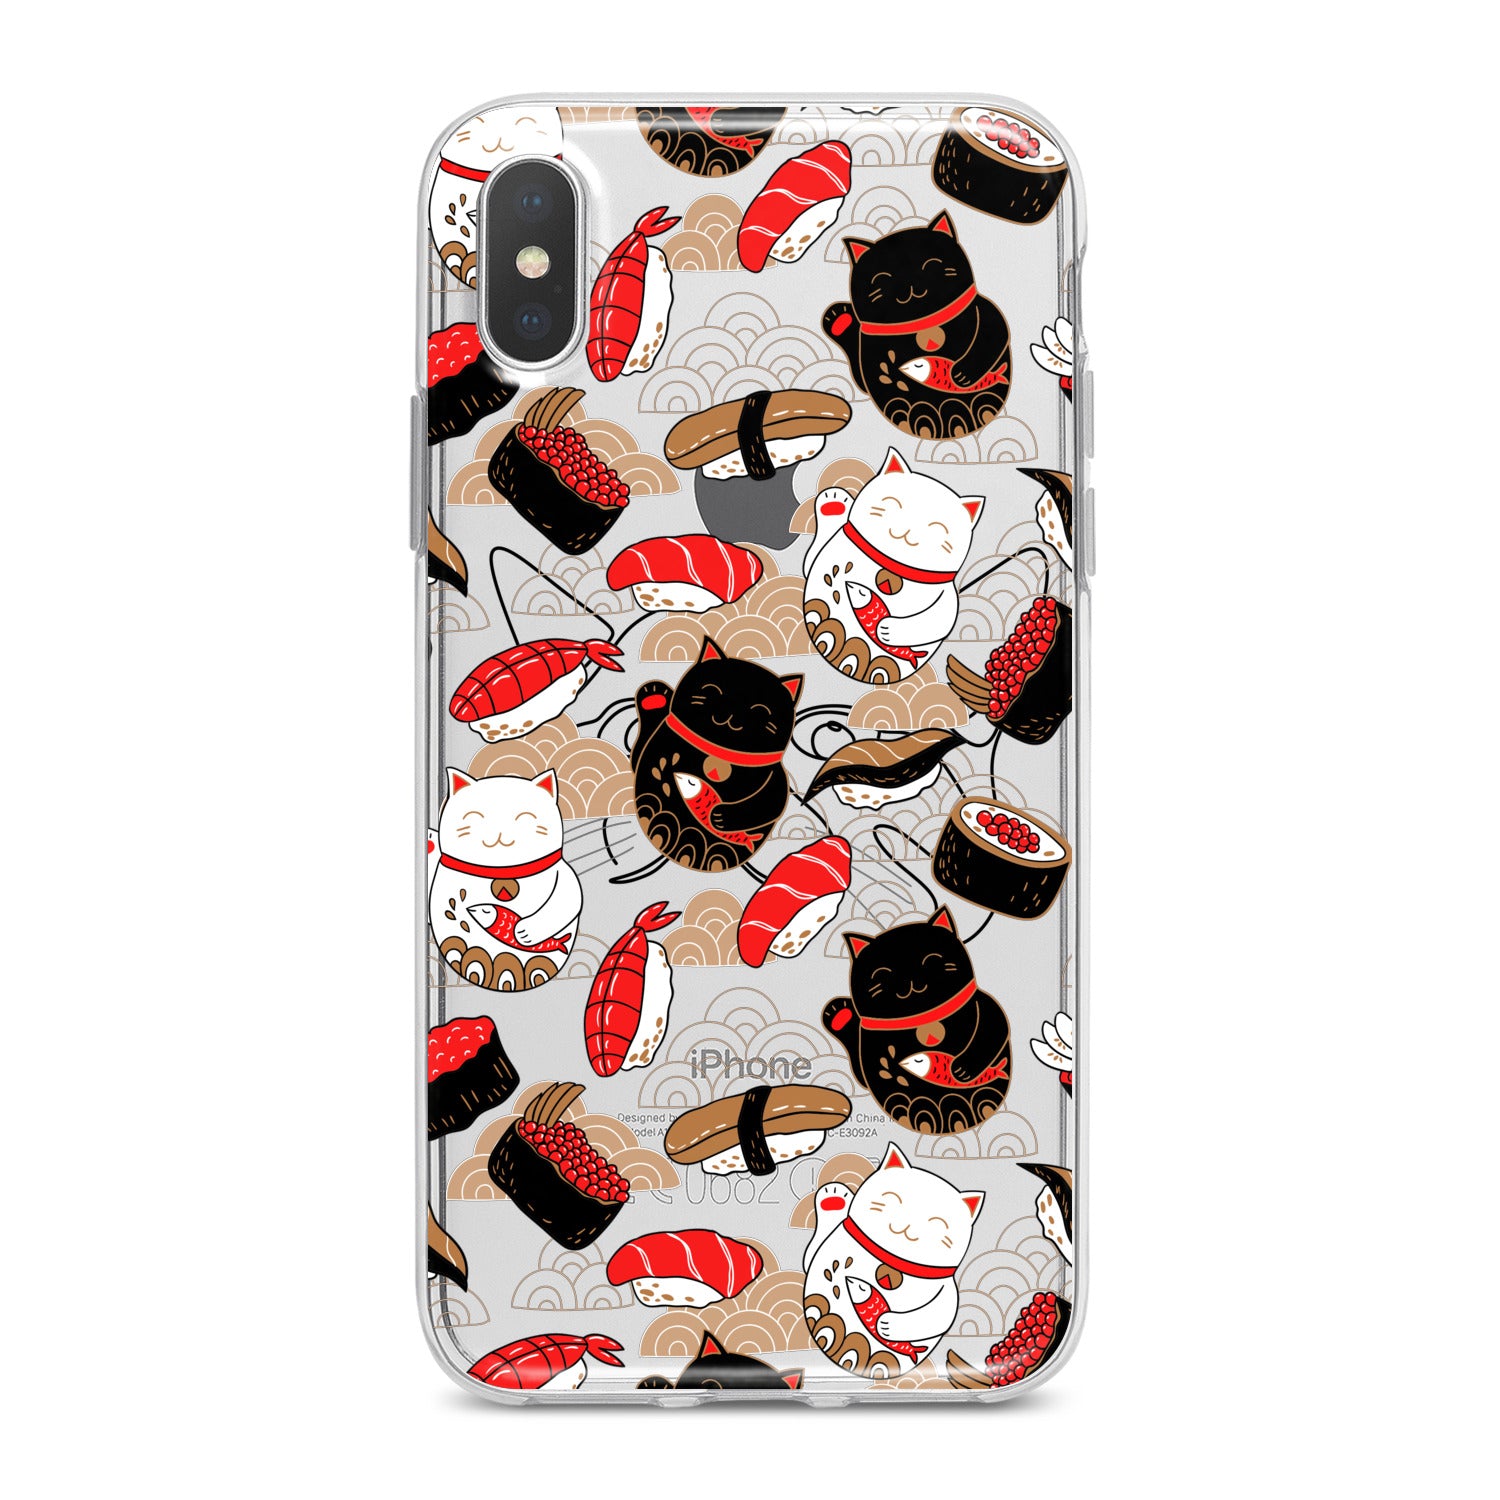 Lex Altern Japanese Cats Phone Case for your iPhone & Android phone.